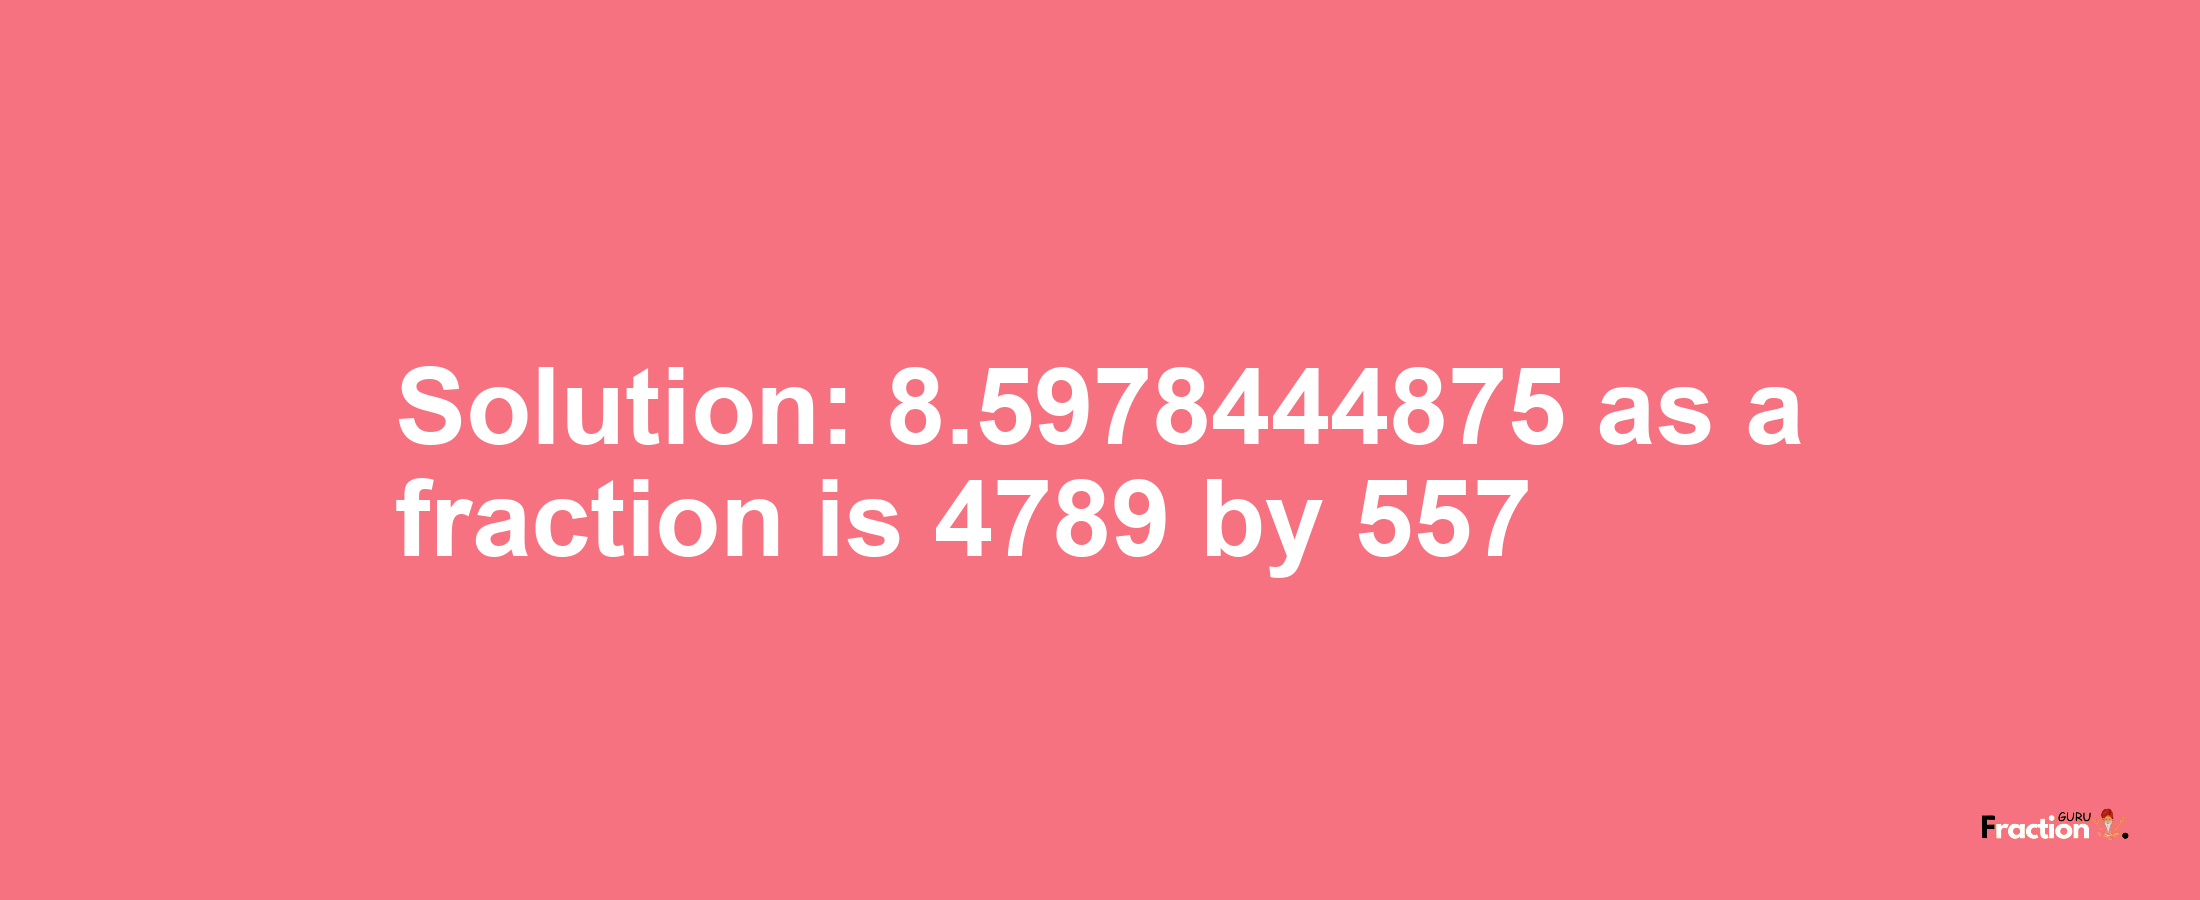 Solution:8.5978444875 as a fraction is 4789/557